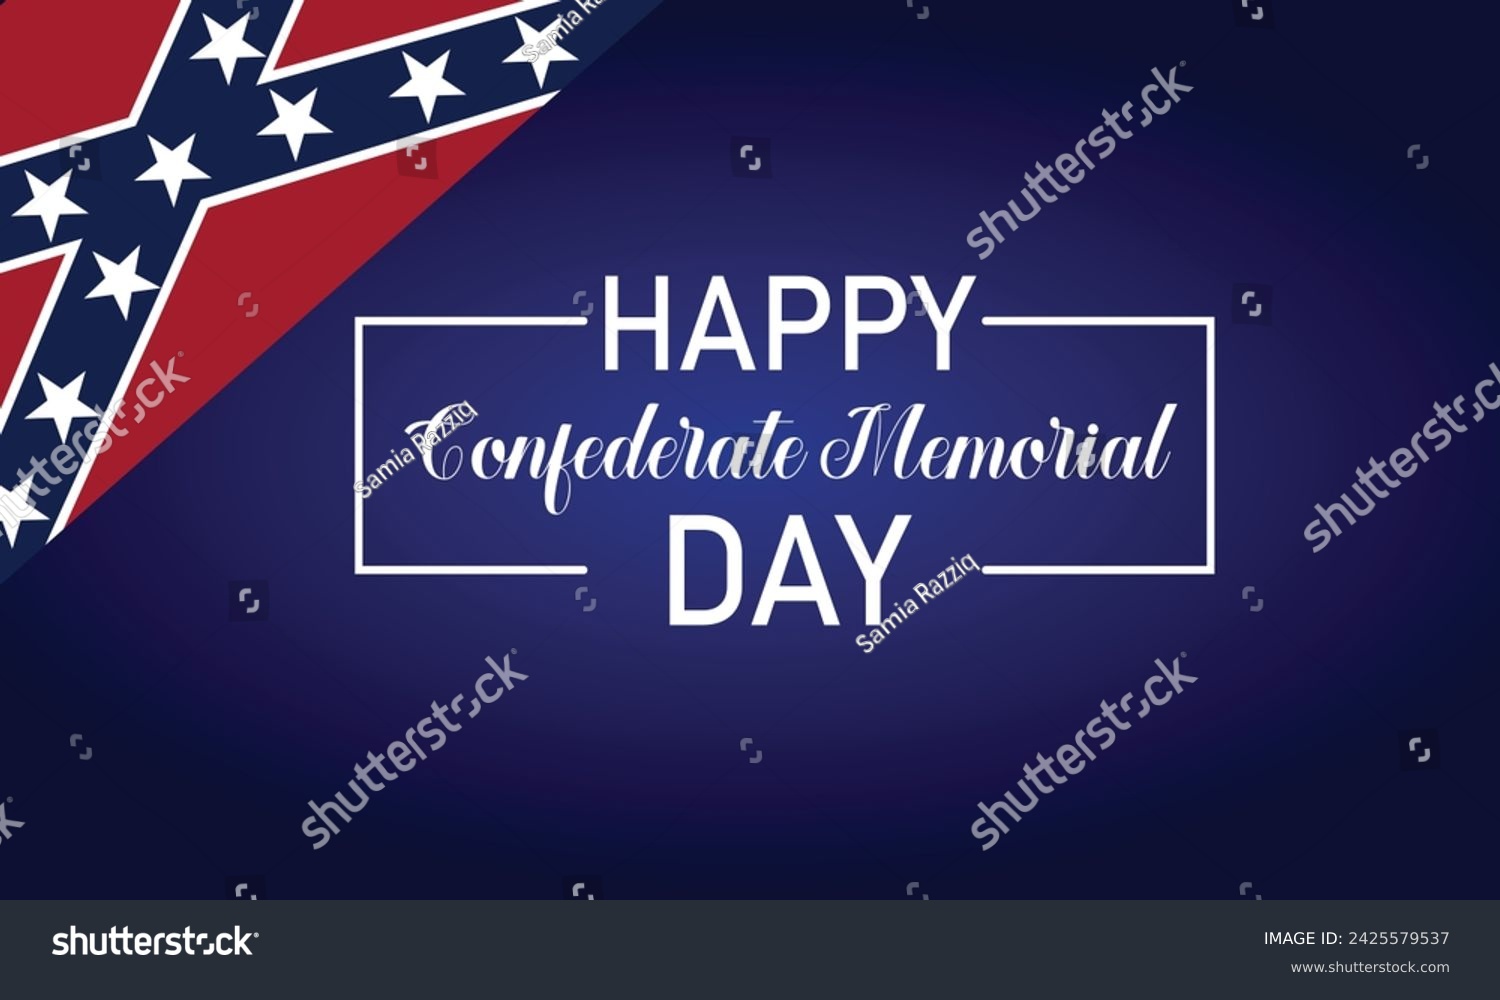 SVG of Happy Confederate Memorial Day Text With Flag And Blue Background Design svg